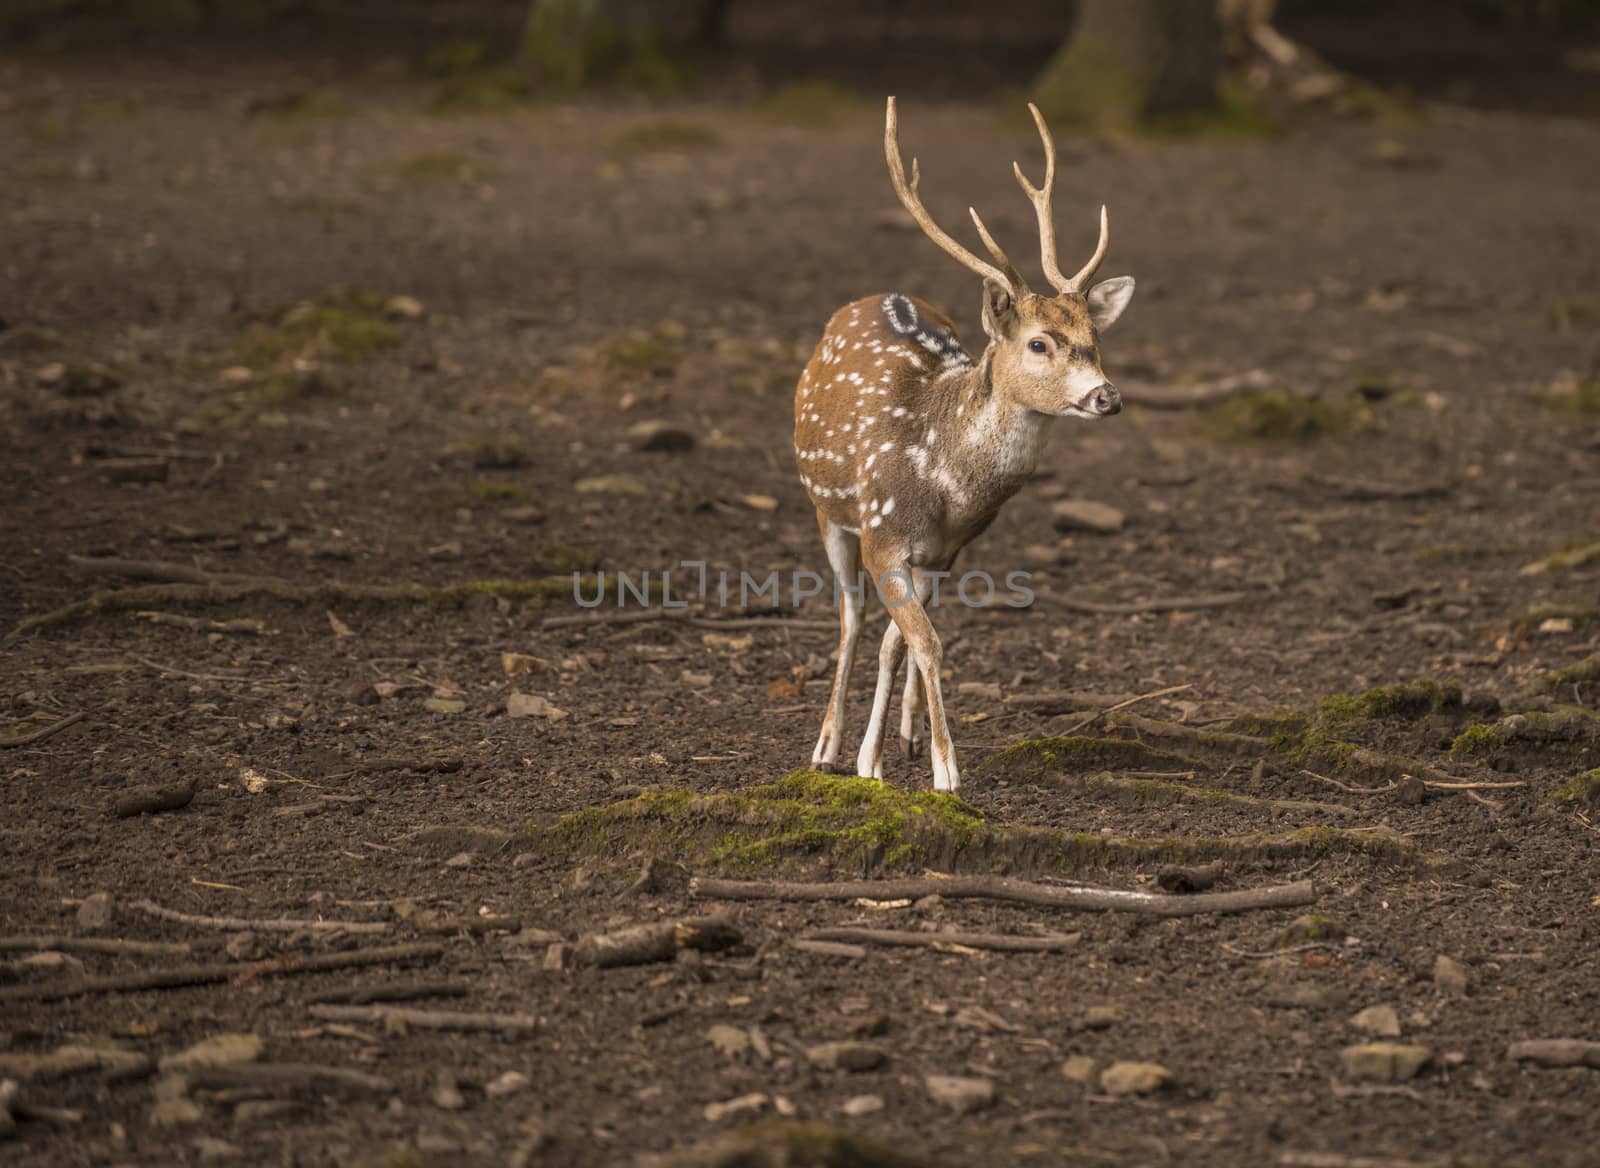 Spotted deer male with beautiful antlers walking through the forest in the Wild Park from Pforzheim, Germany.